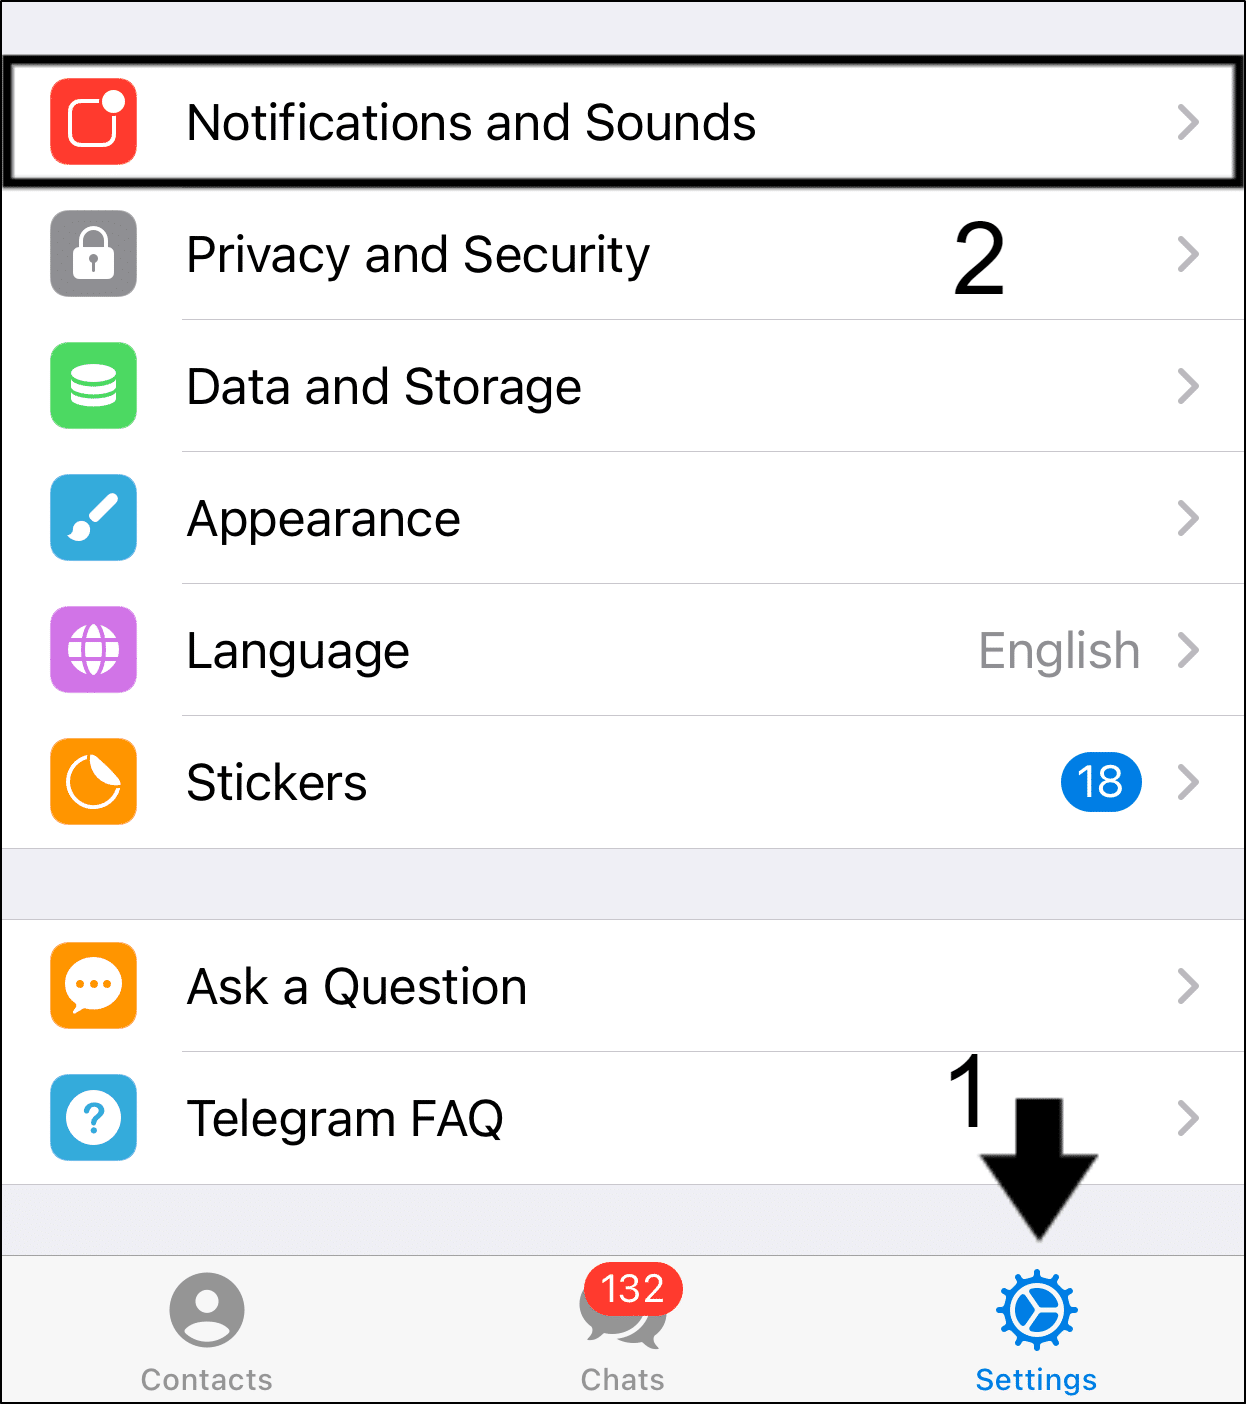 enable app notifications on Telegram on iOS to fix notifications not showing or working